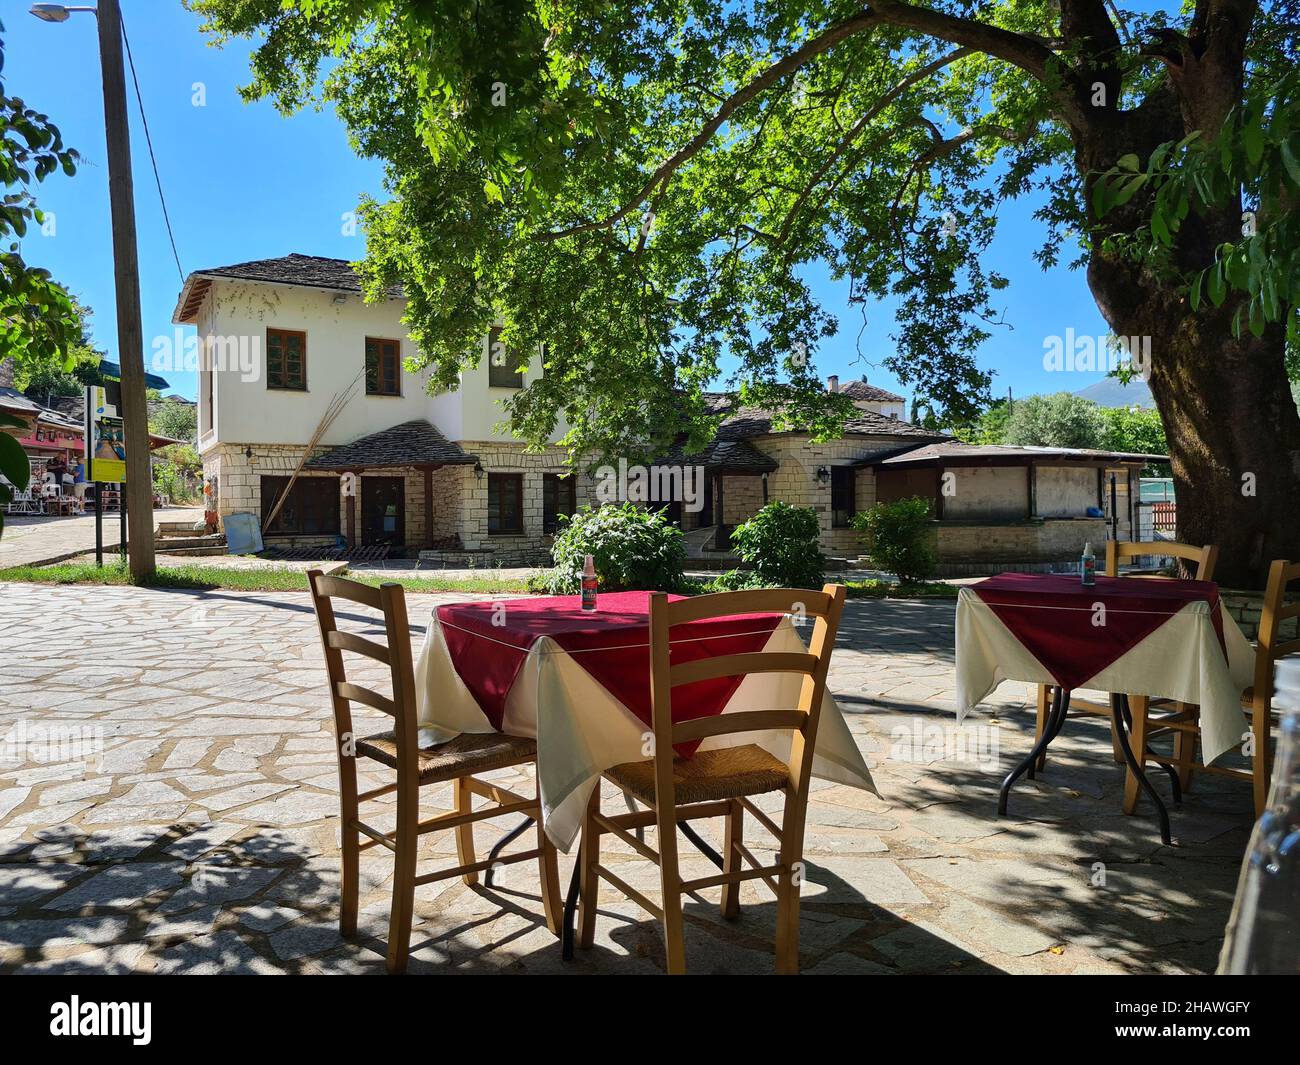 Ioannina, Greece - June 27, 2021: table with spray for disinfection during the corona pandemic in the garden area of a restaurant Stock Photo